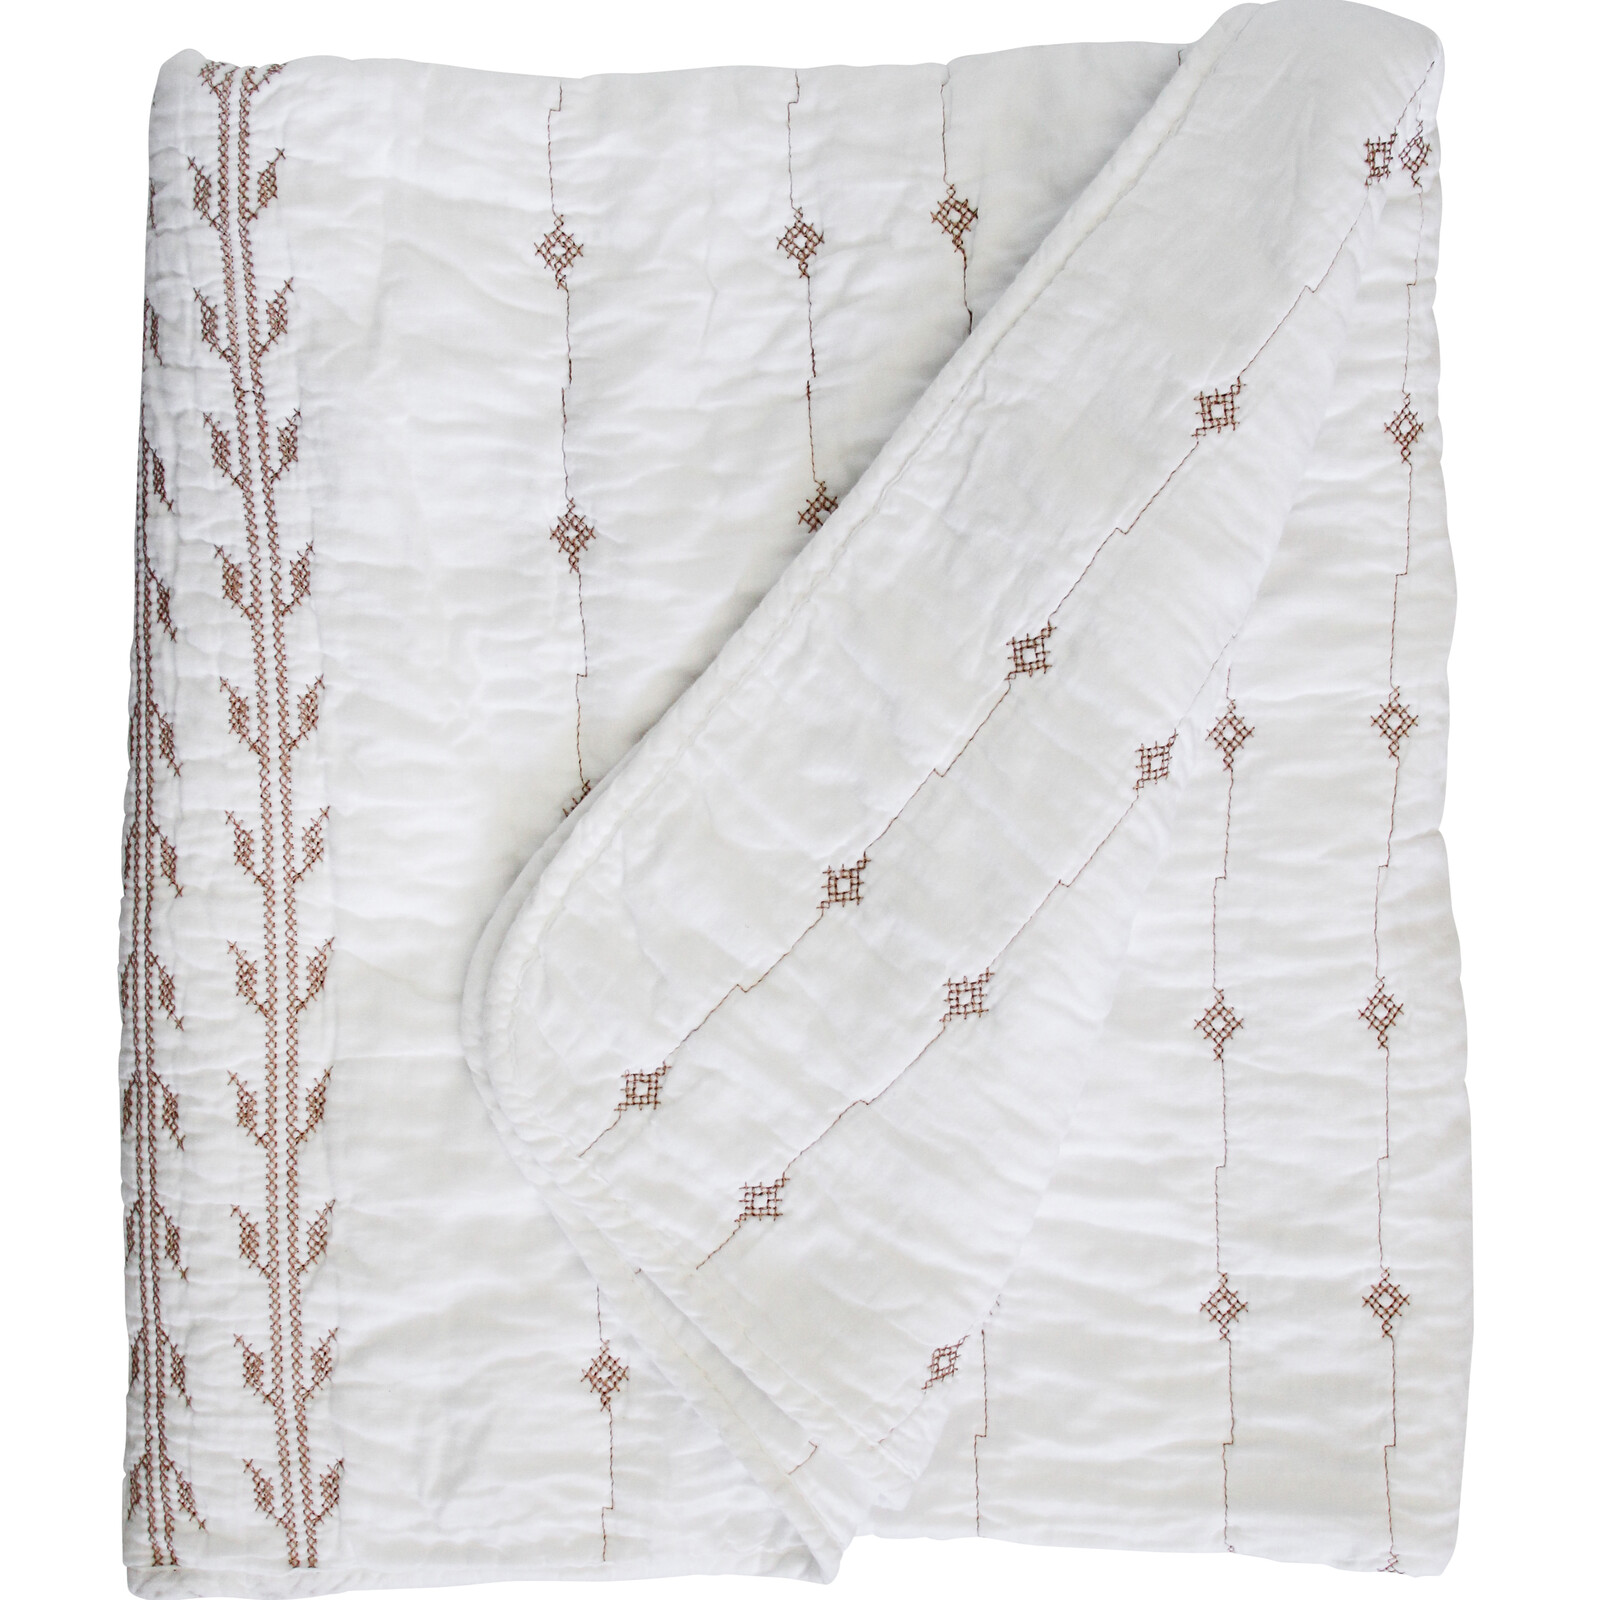 Quilted Throw/ Bedspread Bohemia